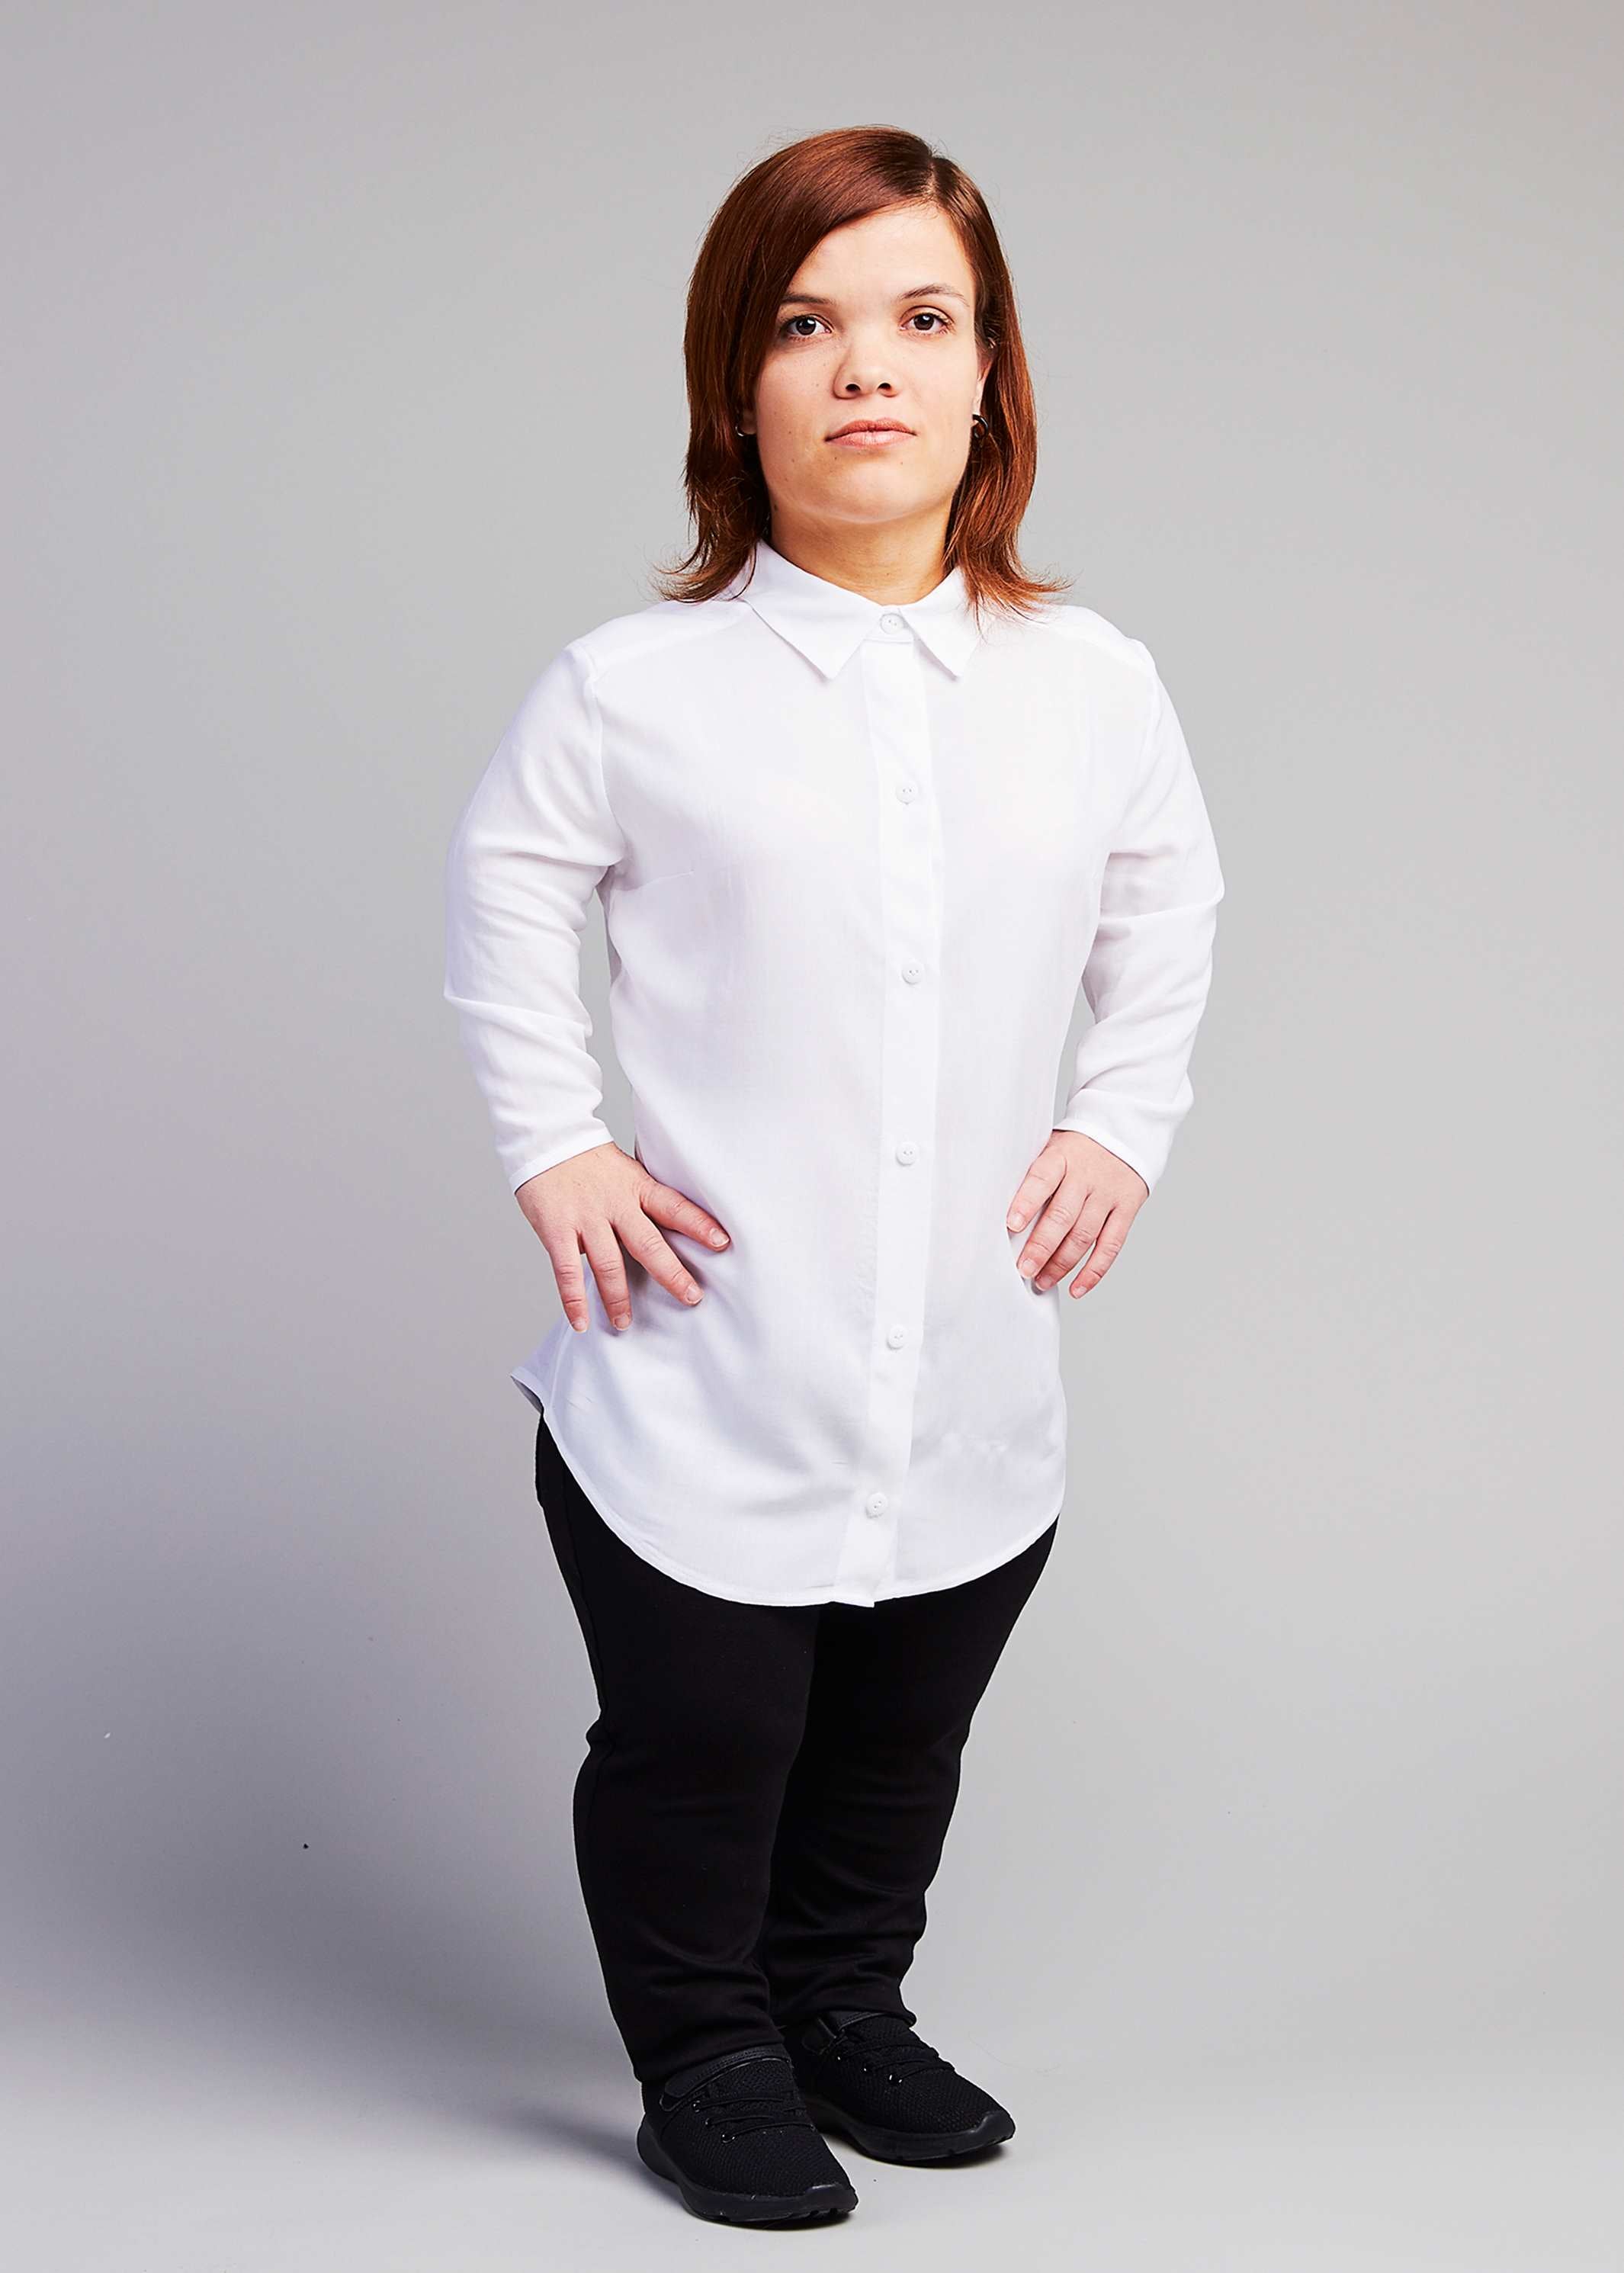 woman with dwarfism wearing white blouse and black pants